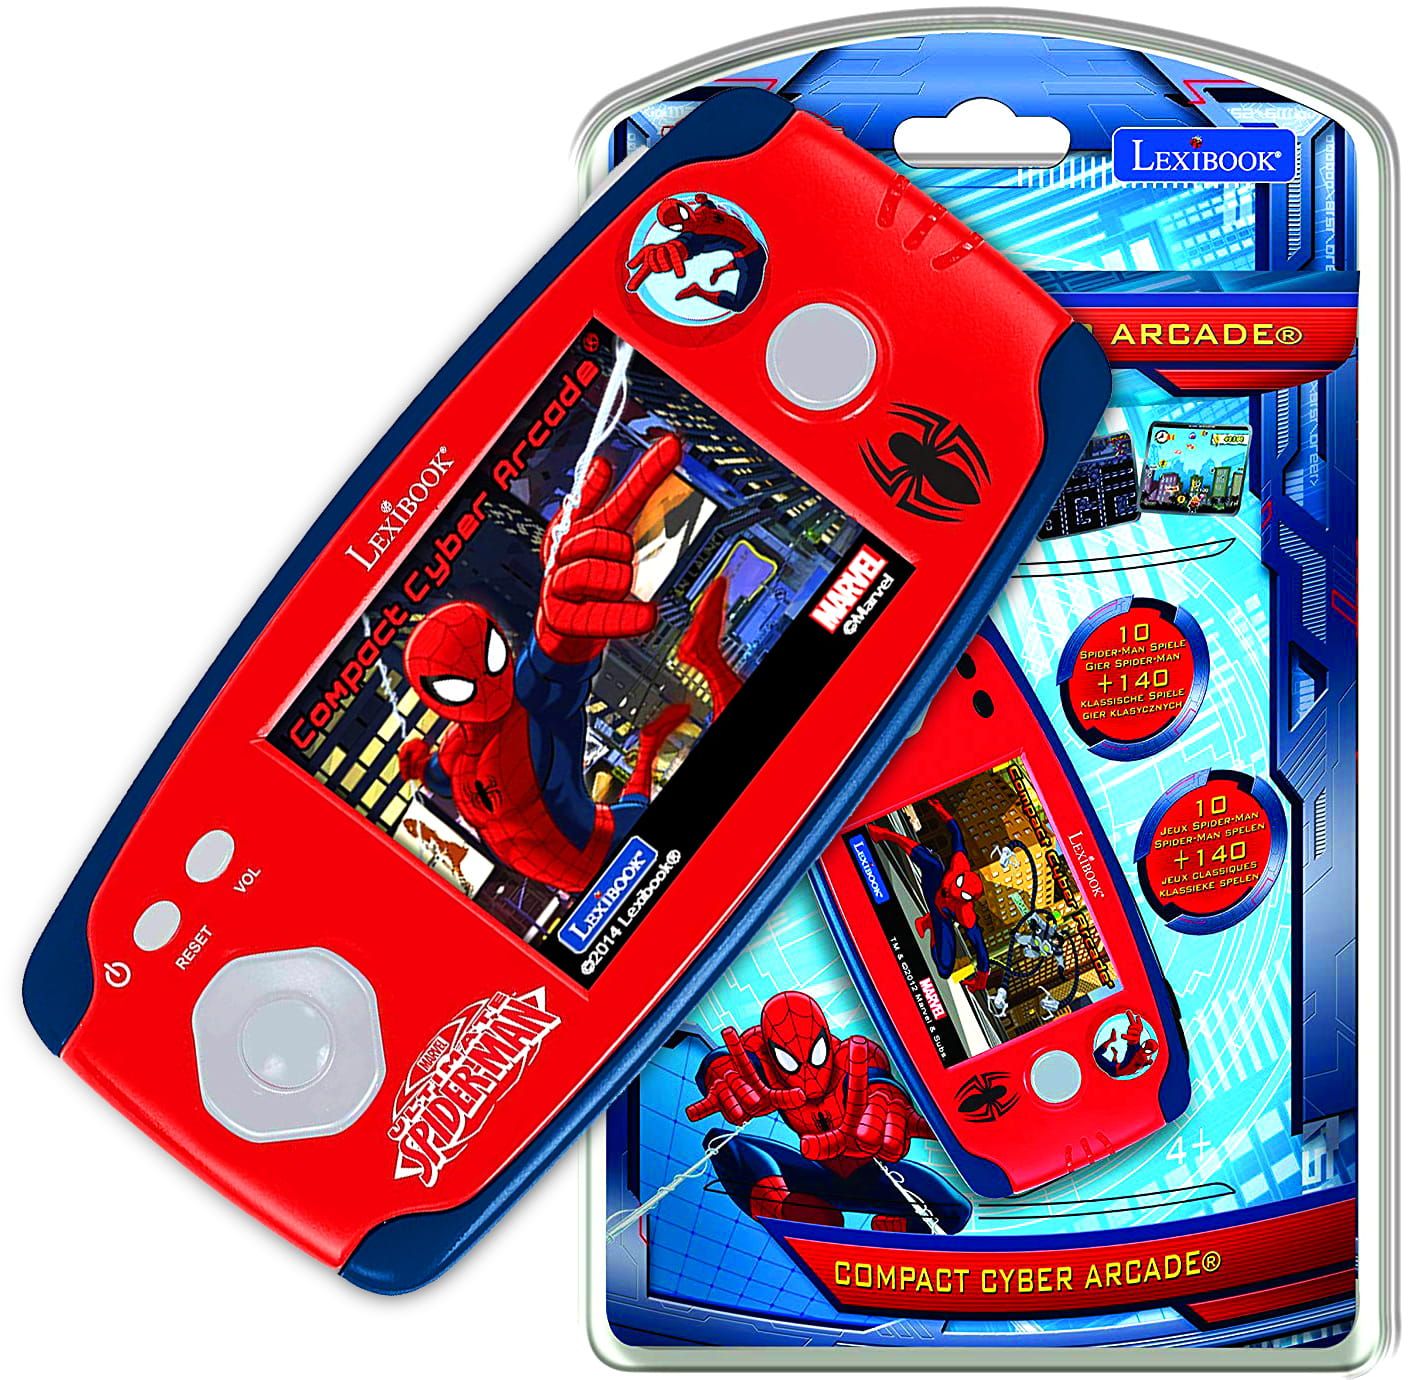 LEXiBOOK Spider-Man Cyber Arcade Pocket Game Console, 150 Games, LCD  Screen, Battery Operated, red/Blue, JL1895SP